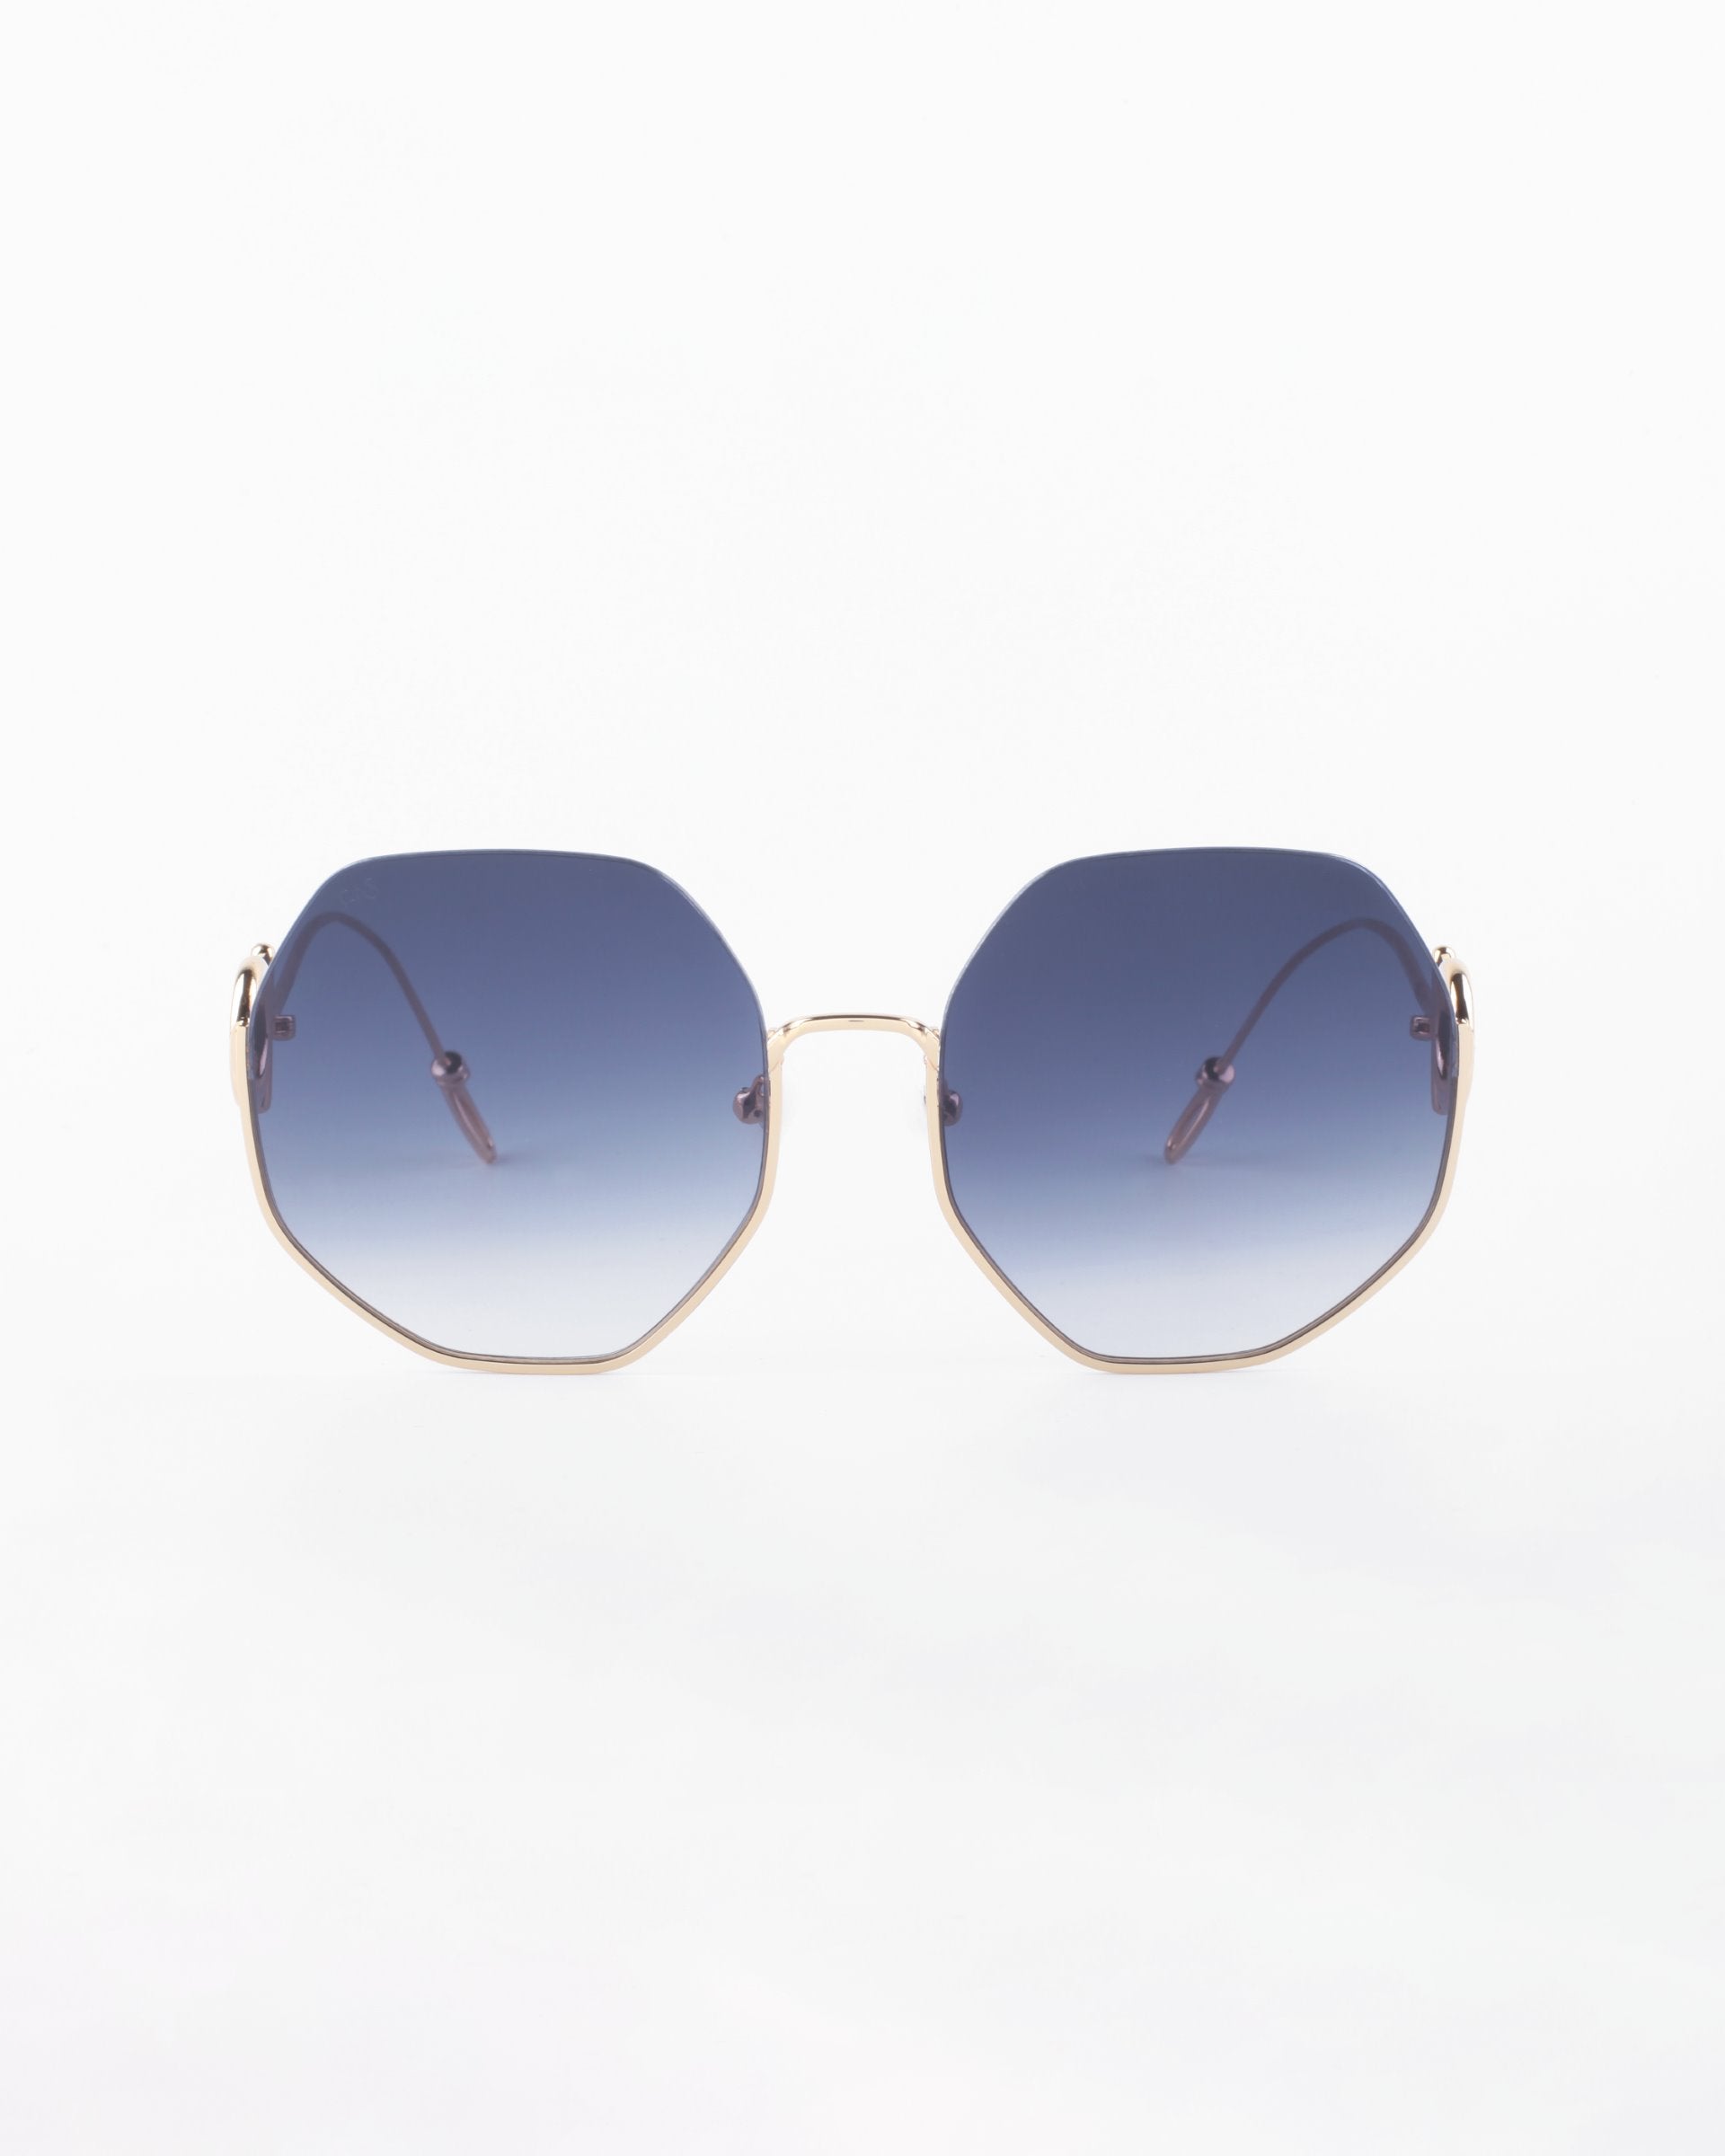 A pair of stylish, limited edition For Art&#39;s Sake® Palace sunglasses with blue gradient hexagonal lenses and thin, 18-karat gold-plated frames is displayed against a plain white background. The design is modern and chic, offering both a fashionable look and UVA &amp; UVB protection.